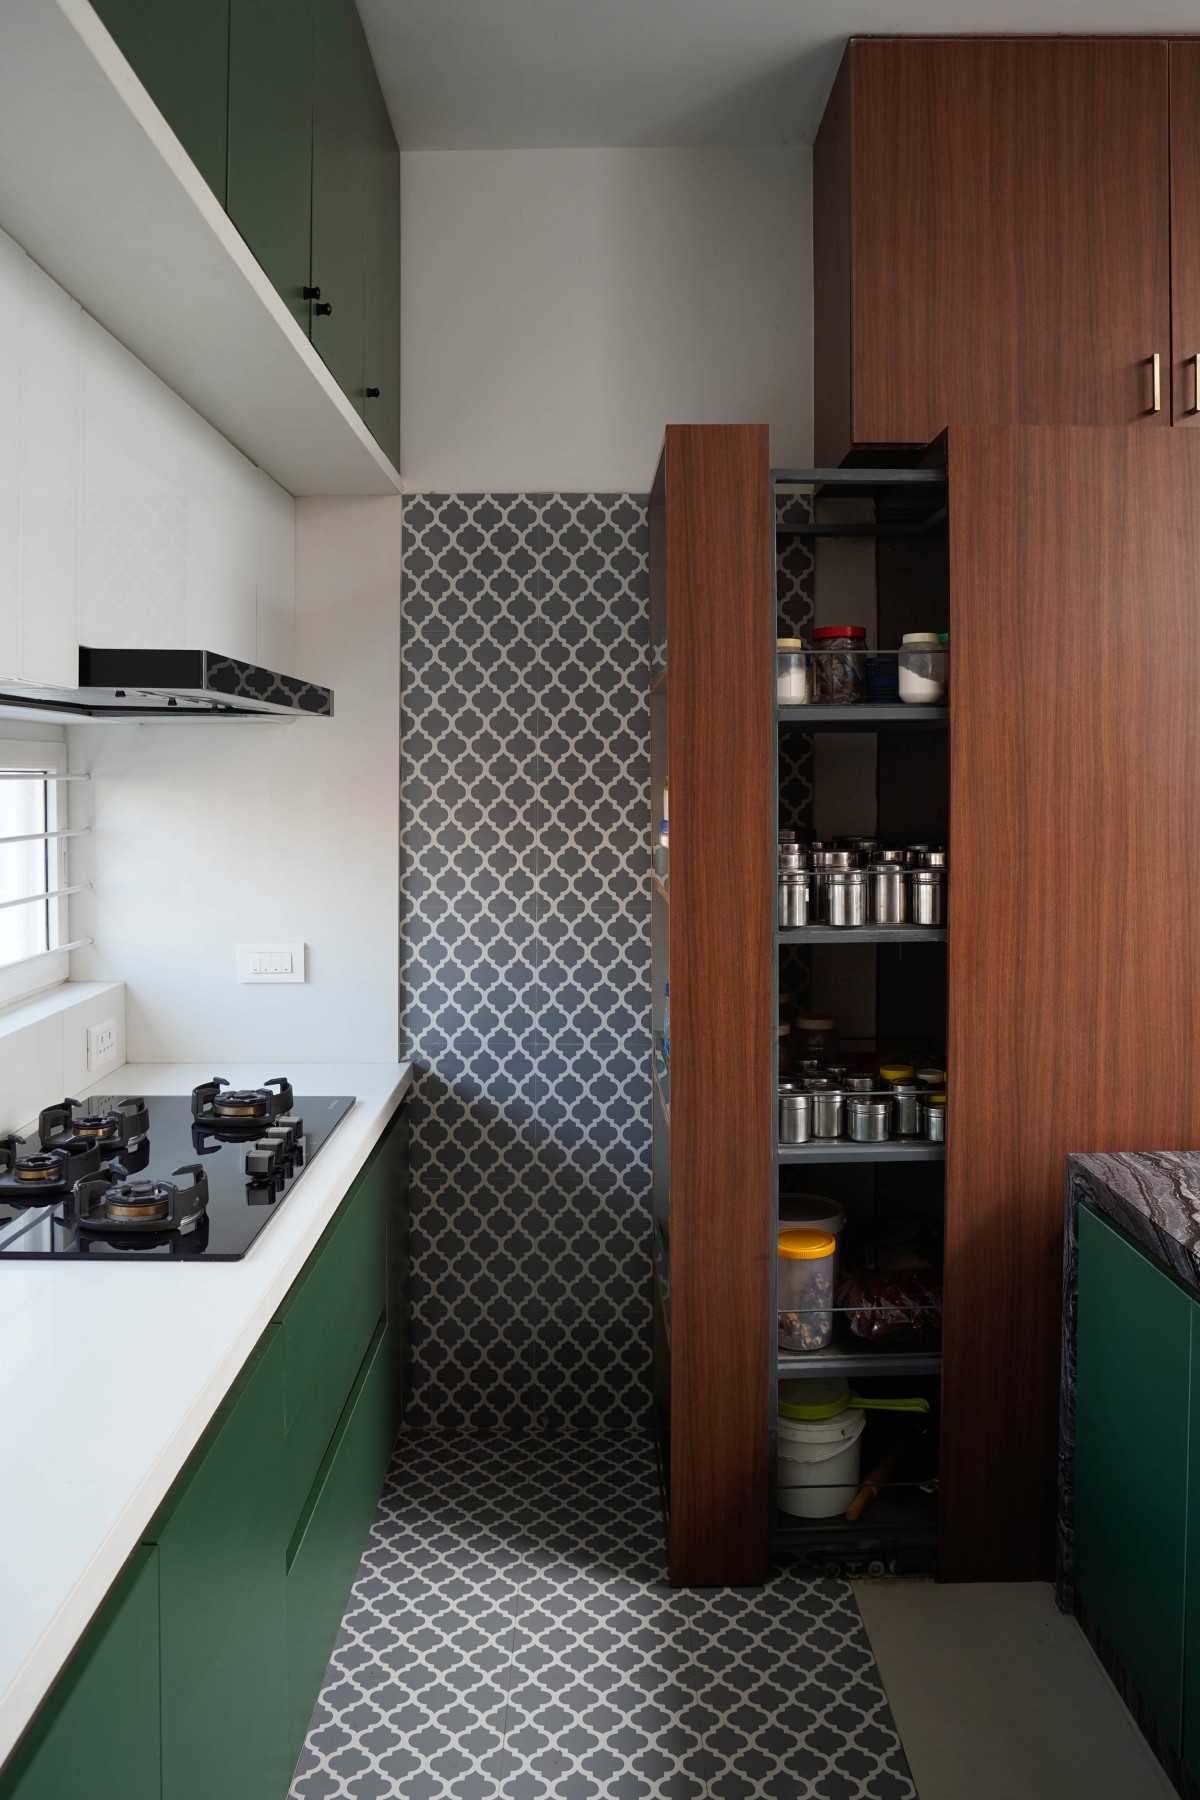 Kitchen of Athulyam by Outlined Architects